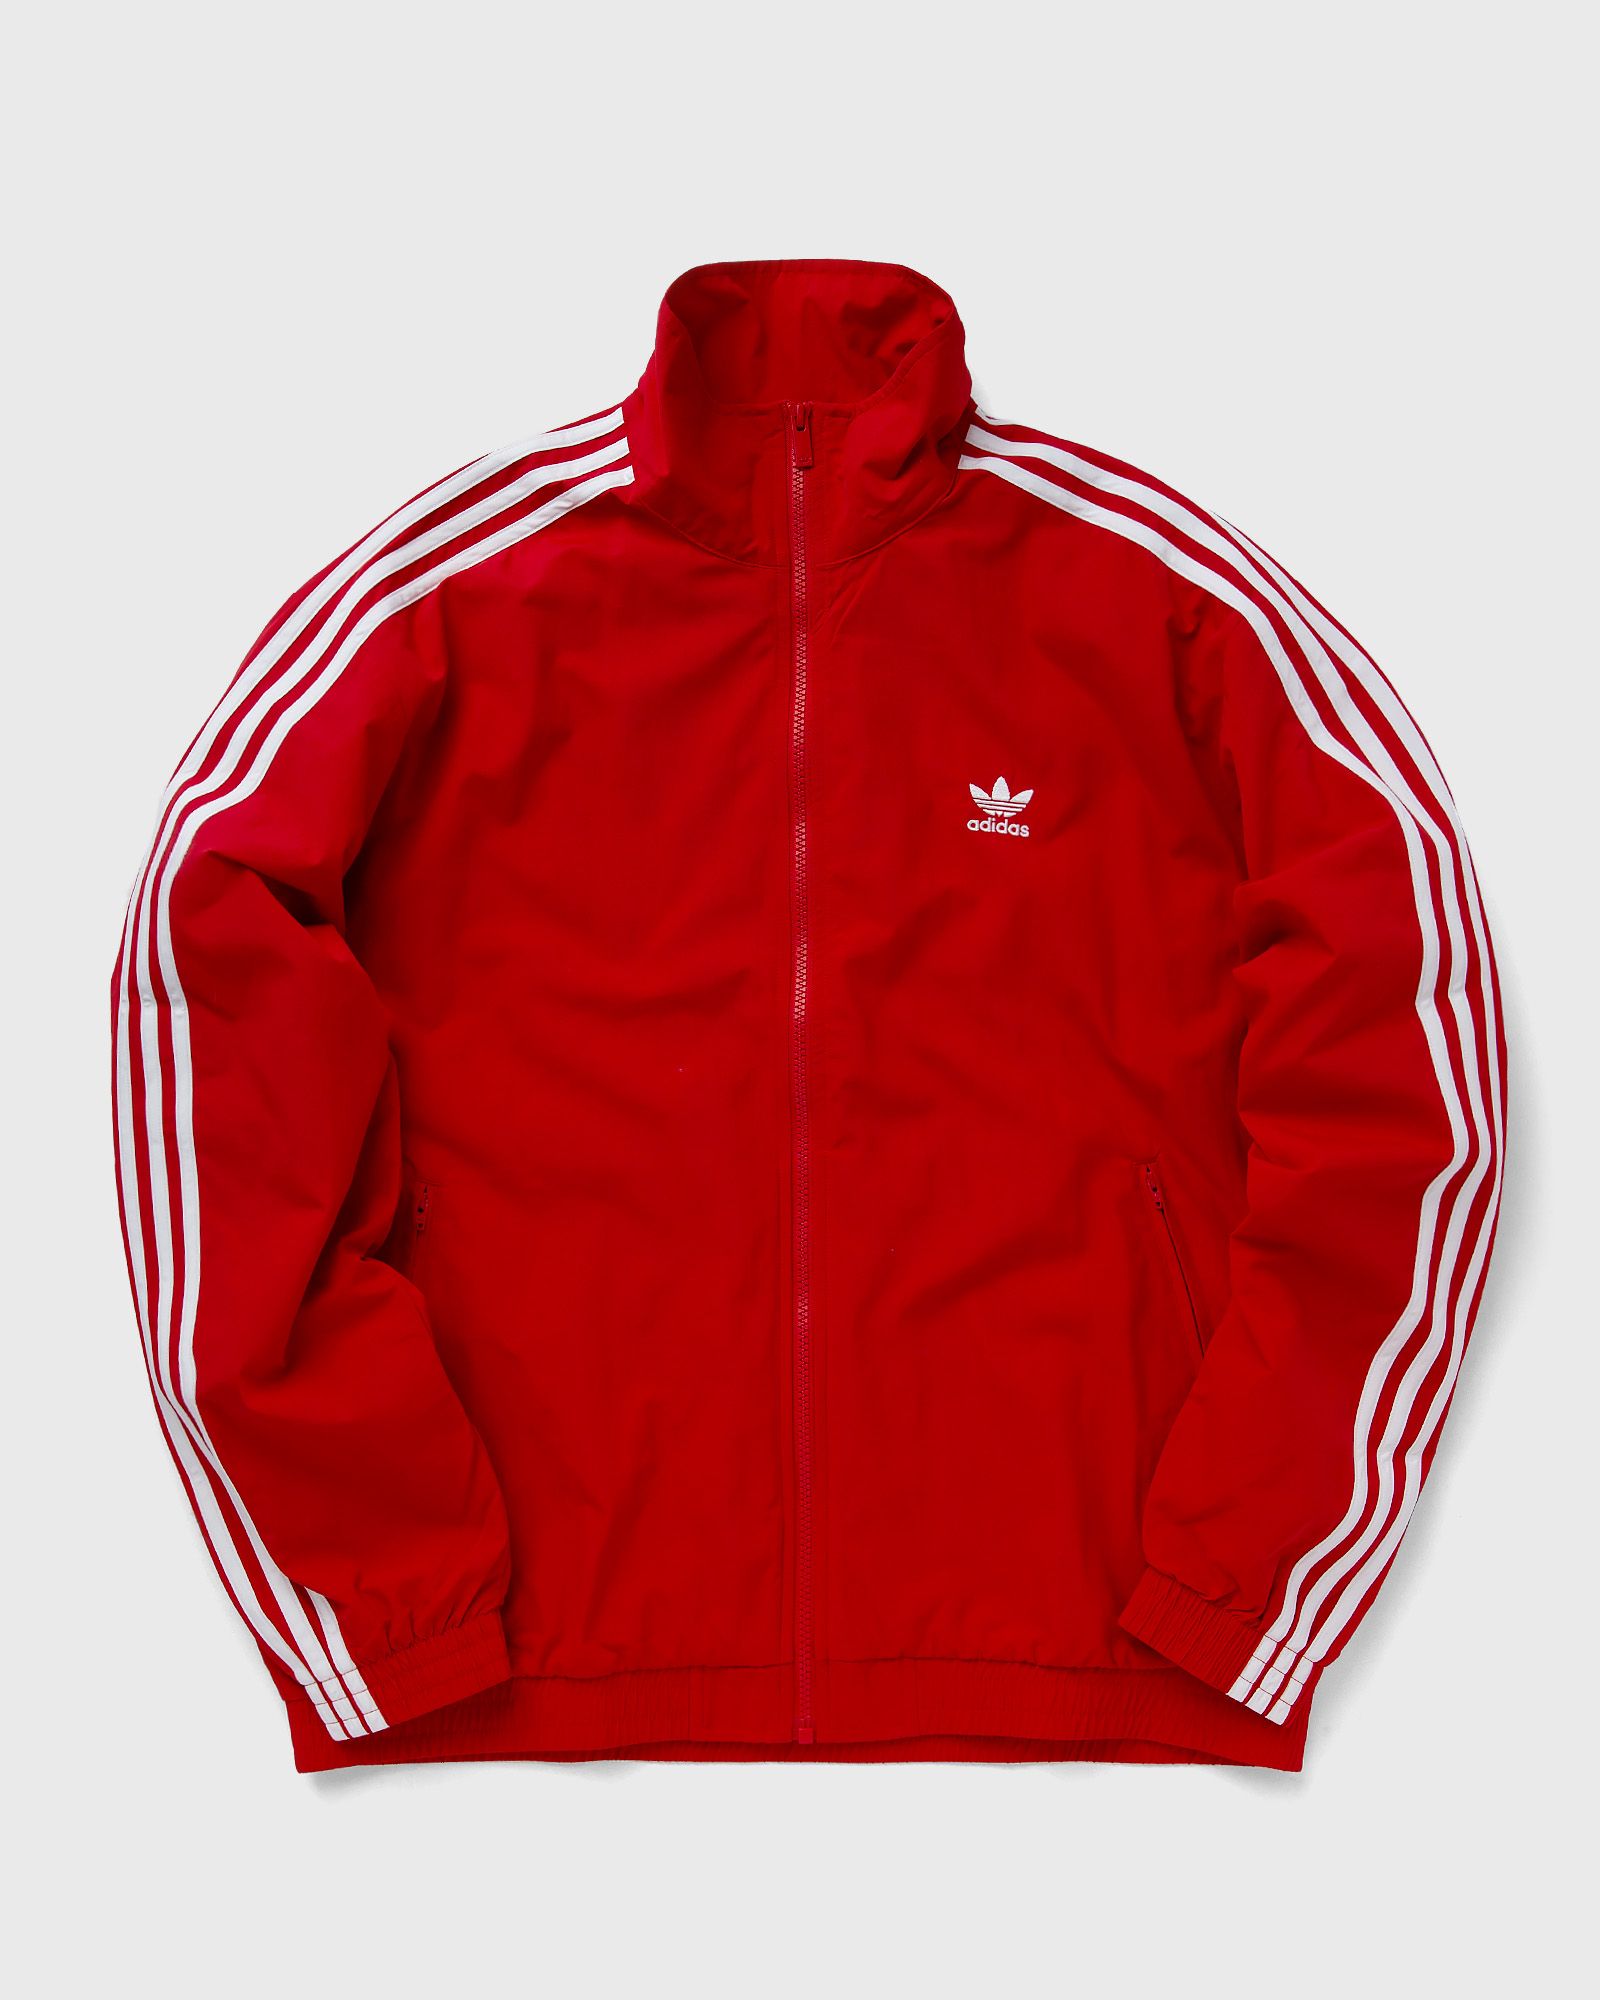 Adidas - woven firebird track top men track jackets|zippers red|white in größe:l